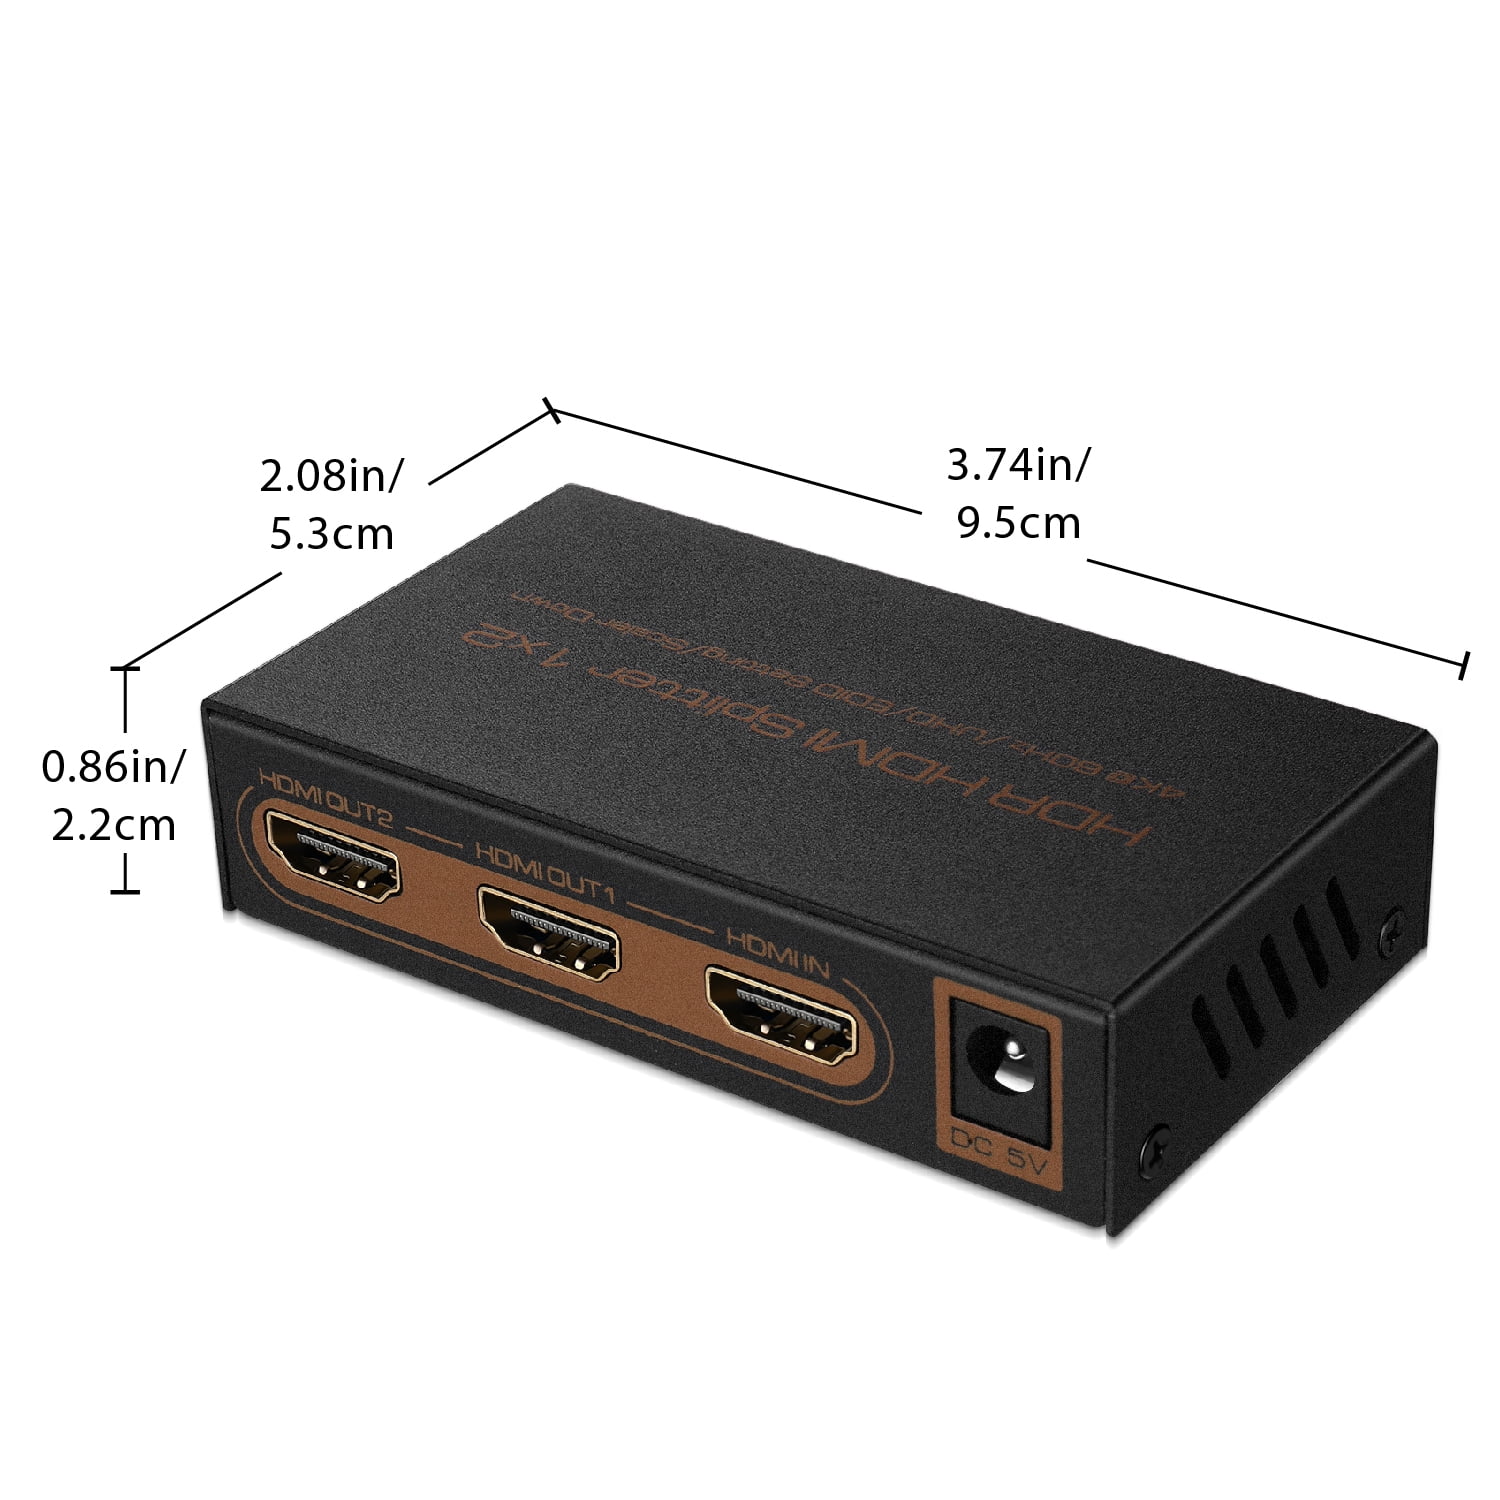 2-Port HDMI Splitter, 4K 60Hz HDMI 2.0 Video, 4K HDMI Splitter 1 In 2 Out,  1x2 HDMI Display/Output Splitter, HDR/HDCP, 20in (50cm) Built-in HDMI Cable